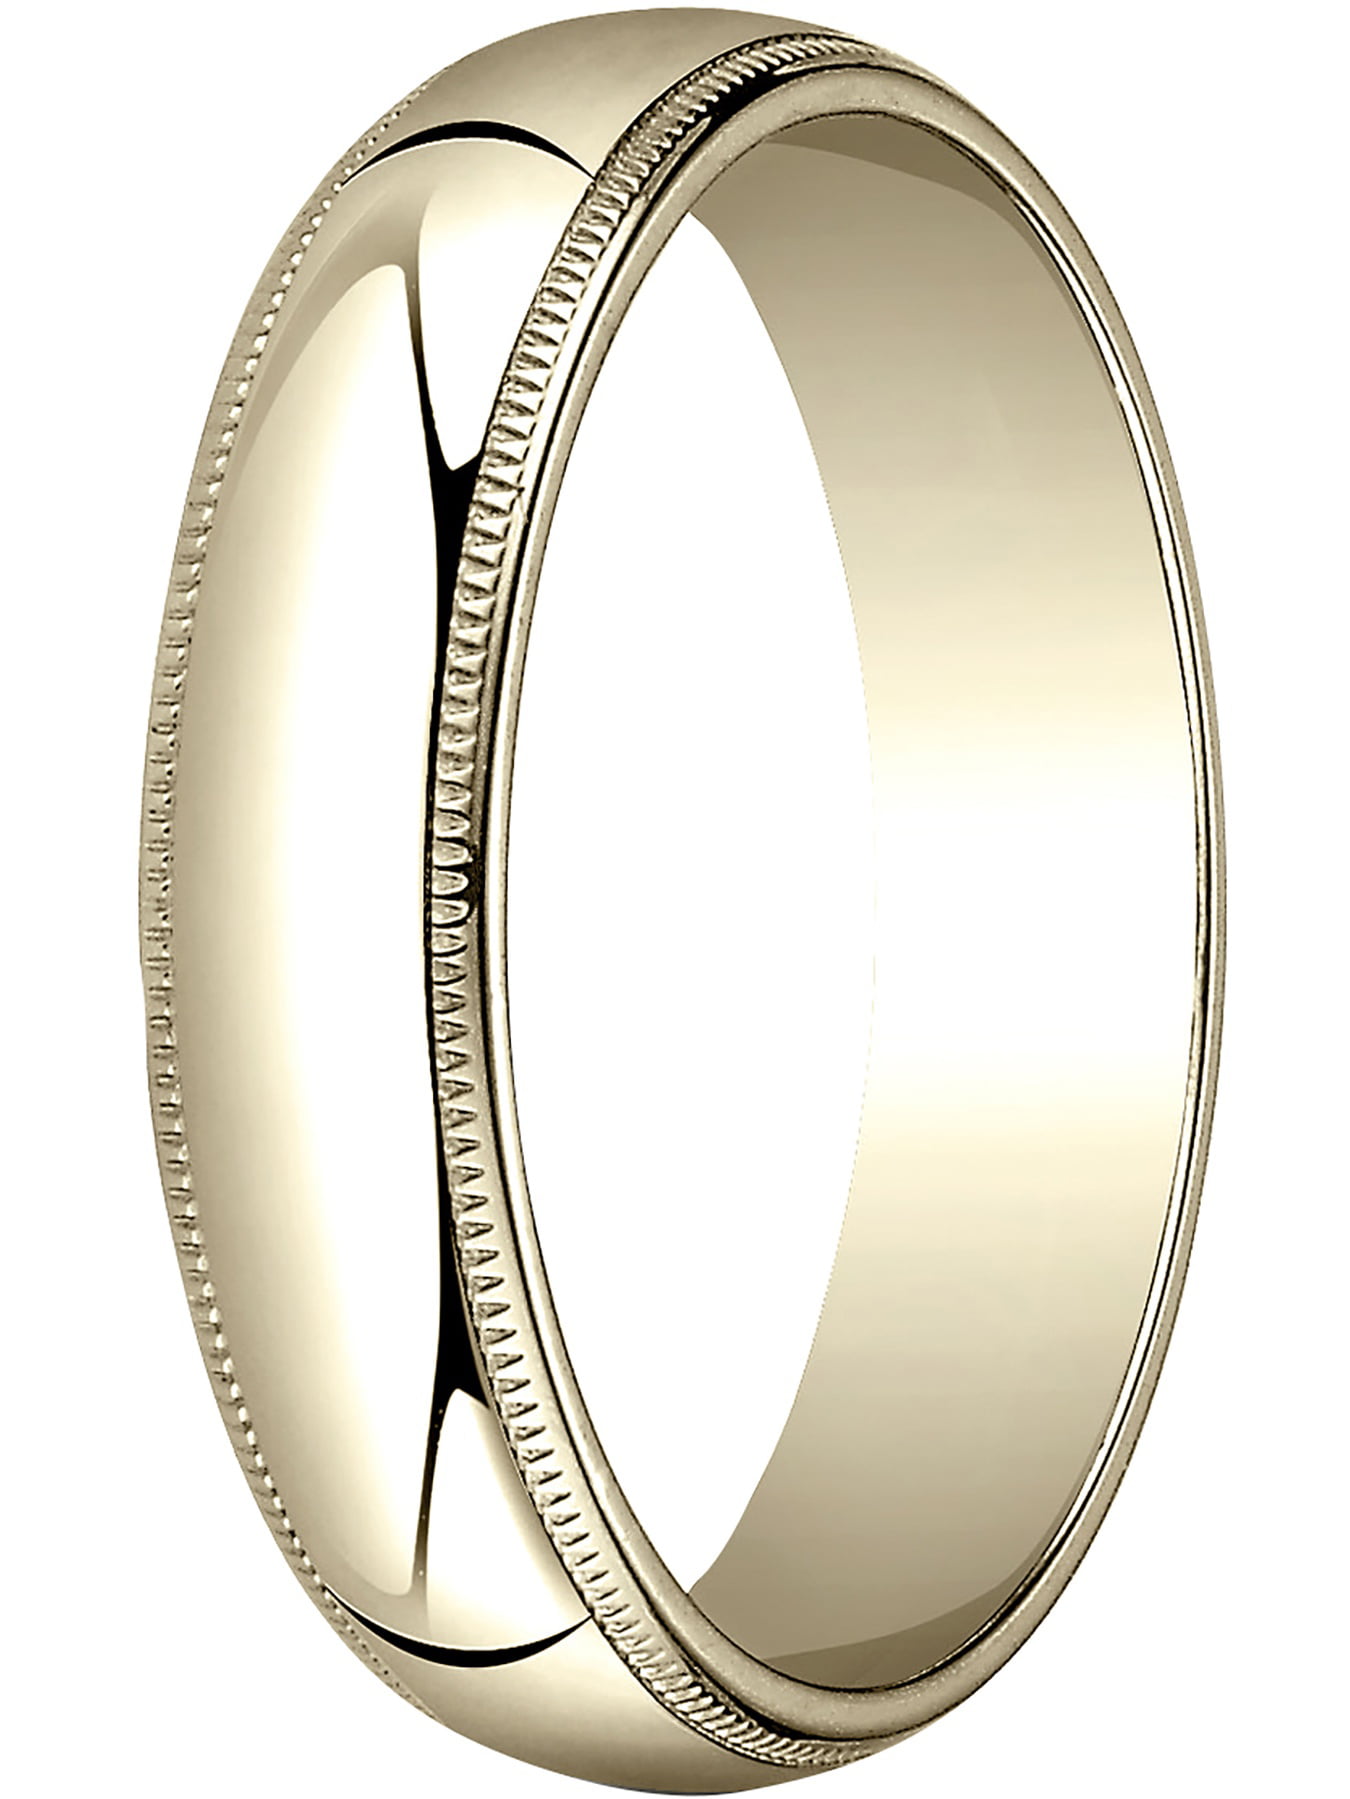 Benchmark 18K Yellow Gold 3mm Slightly Domed Traditional Oval Wedding Band Ring Sizes 4-15 